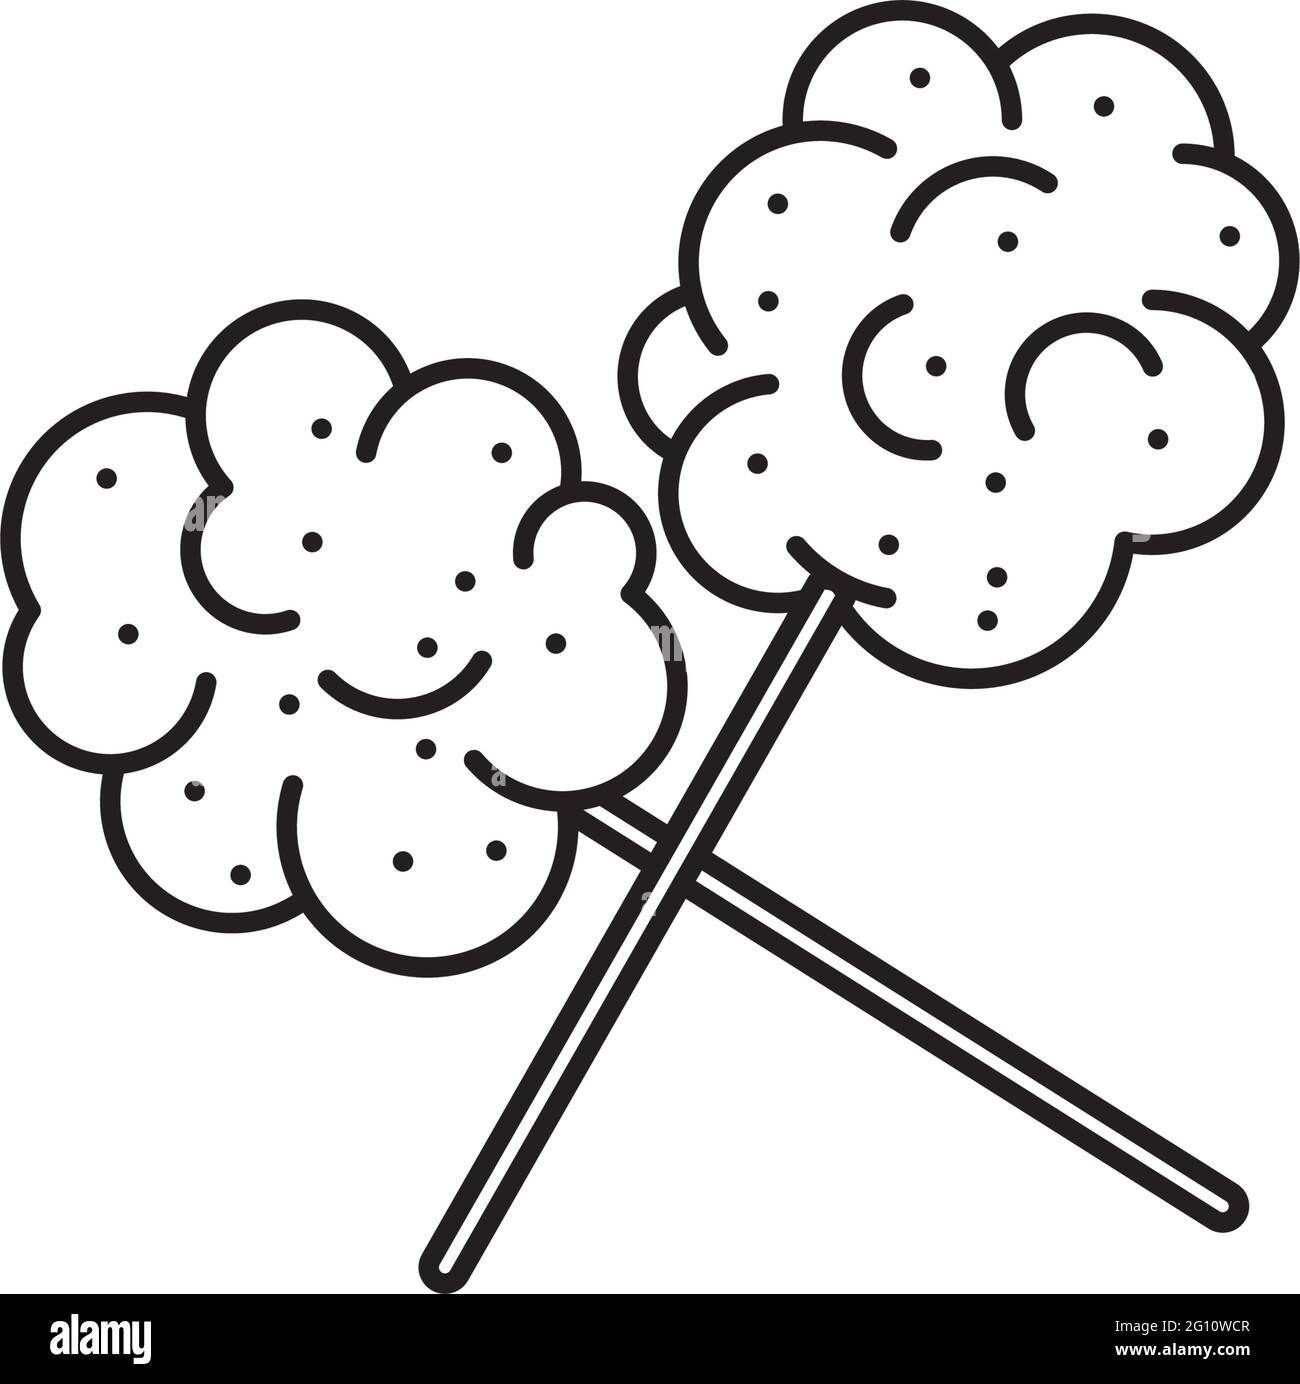 Cotton Candy Clipart Black And White